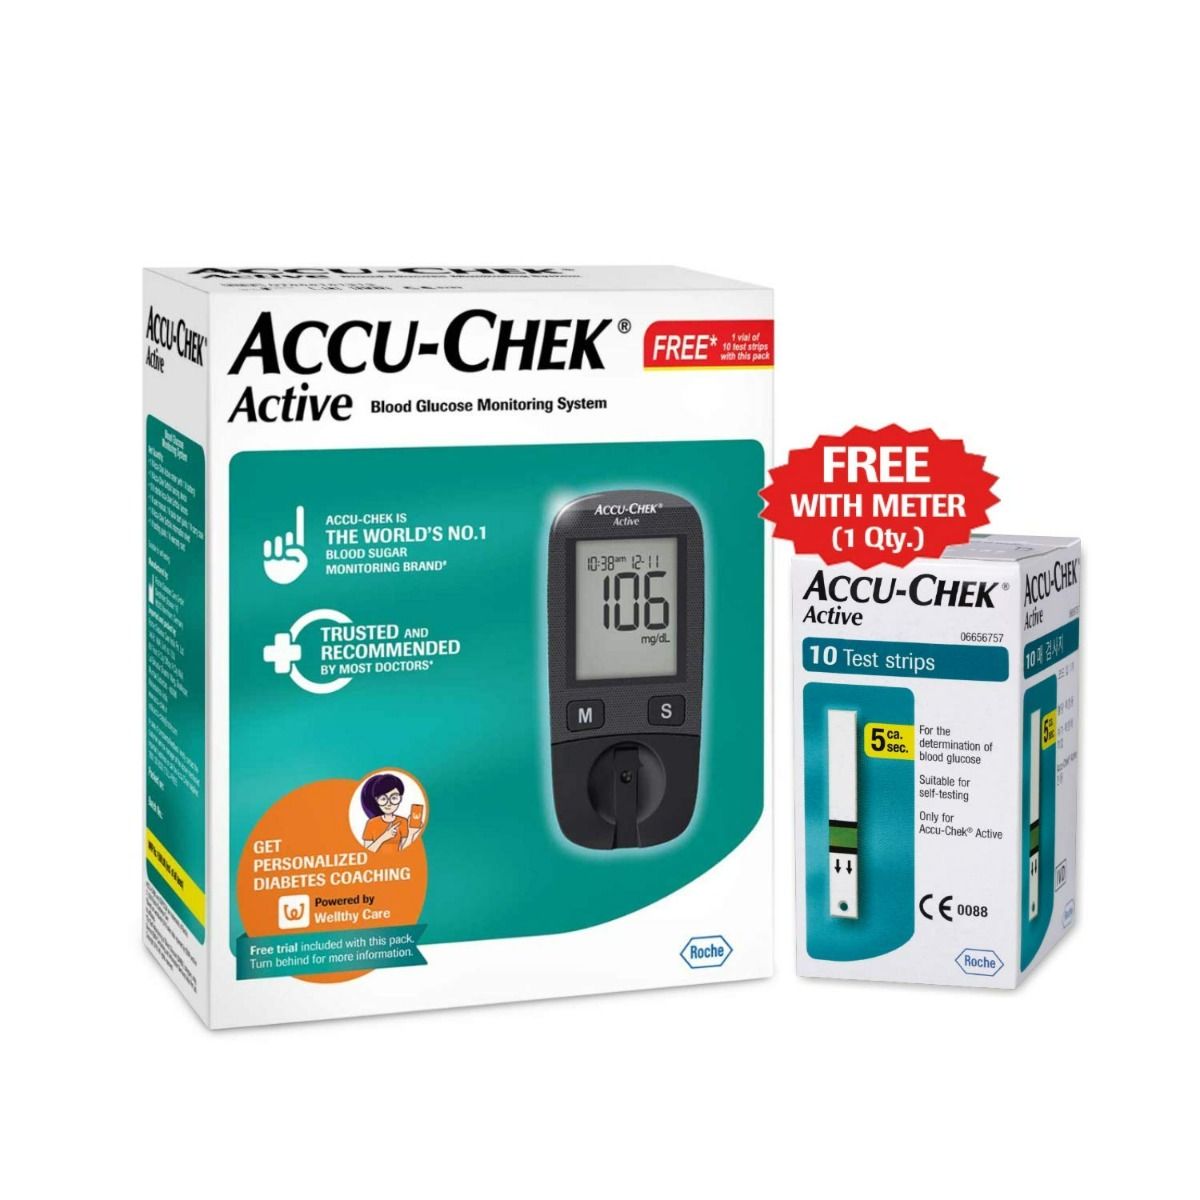 Accu-Chek Active Blood Glucose Monitoring System With 10 Free Test Strips, 1 Kit, Pack of 1 